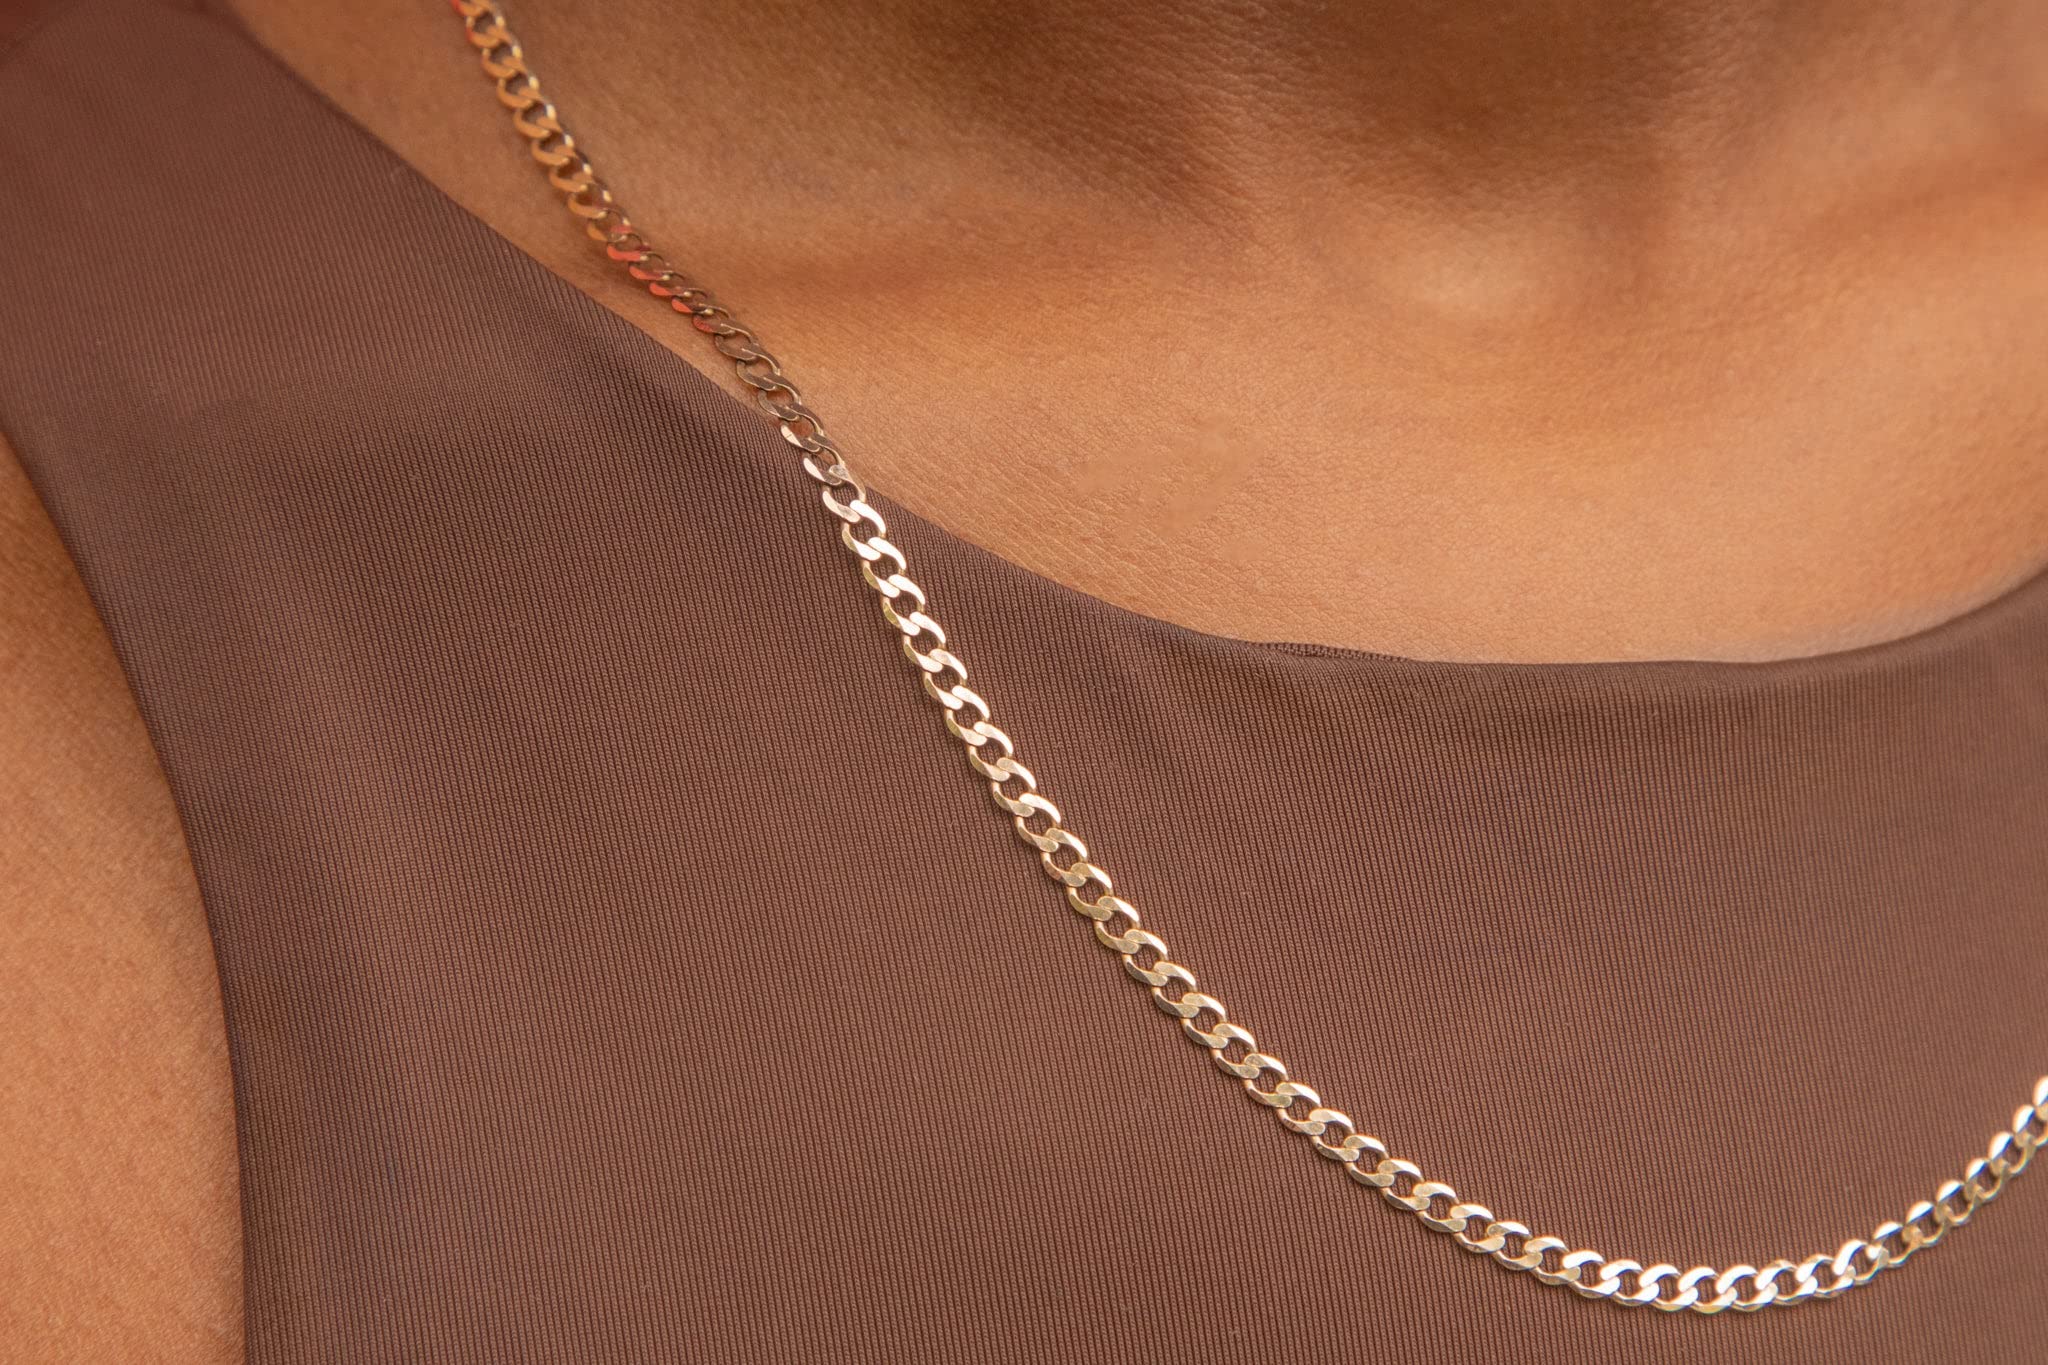 ARGENTO REALE 10K Gold 2.25,2.5MM Curb/Cuban Chain Necklace, 10K Gold Chain, 10K Dainty Necklaces